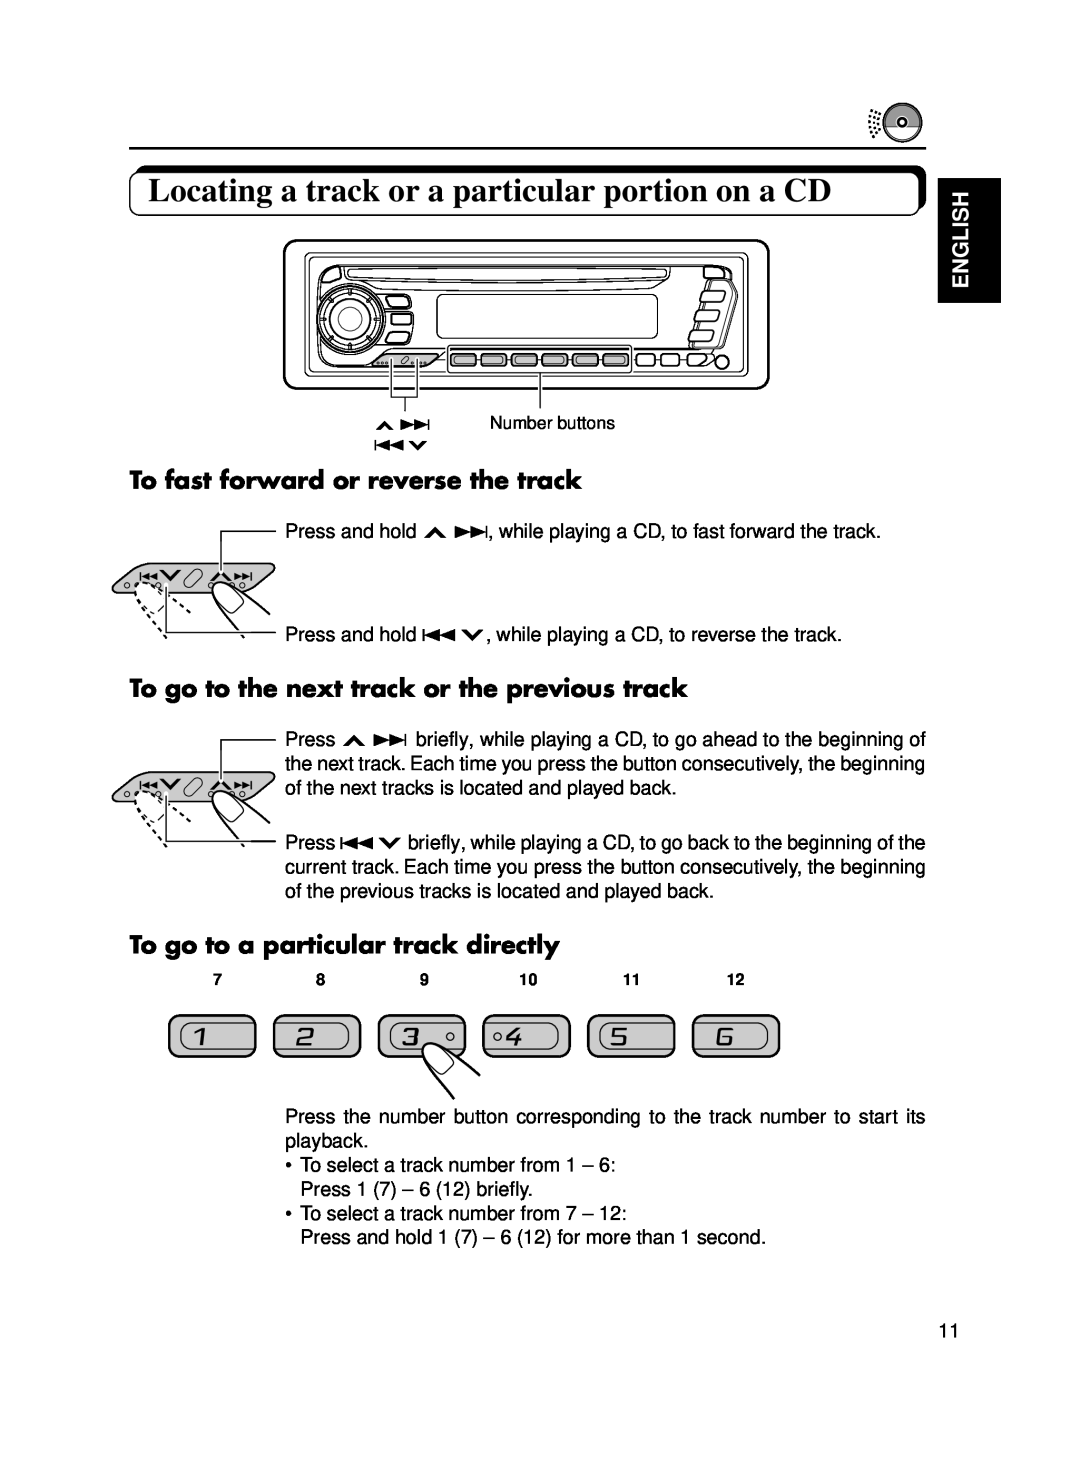 JVC KD-SX650 manual Locating a track or a particular portion on a CD, To fast forward or reverse the track, English 